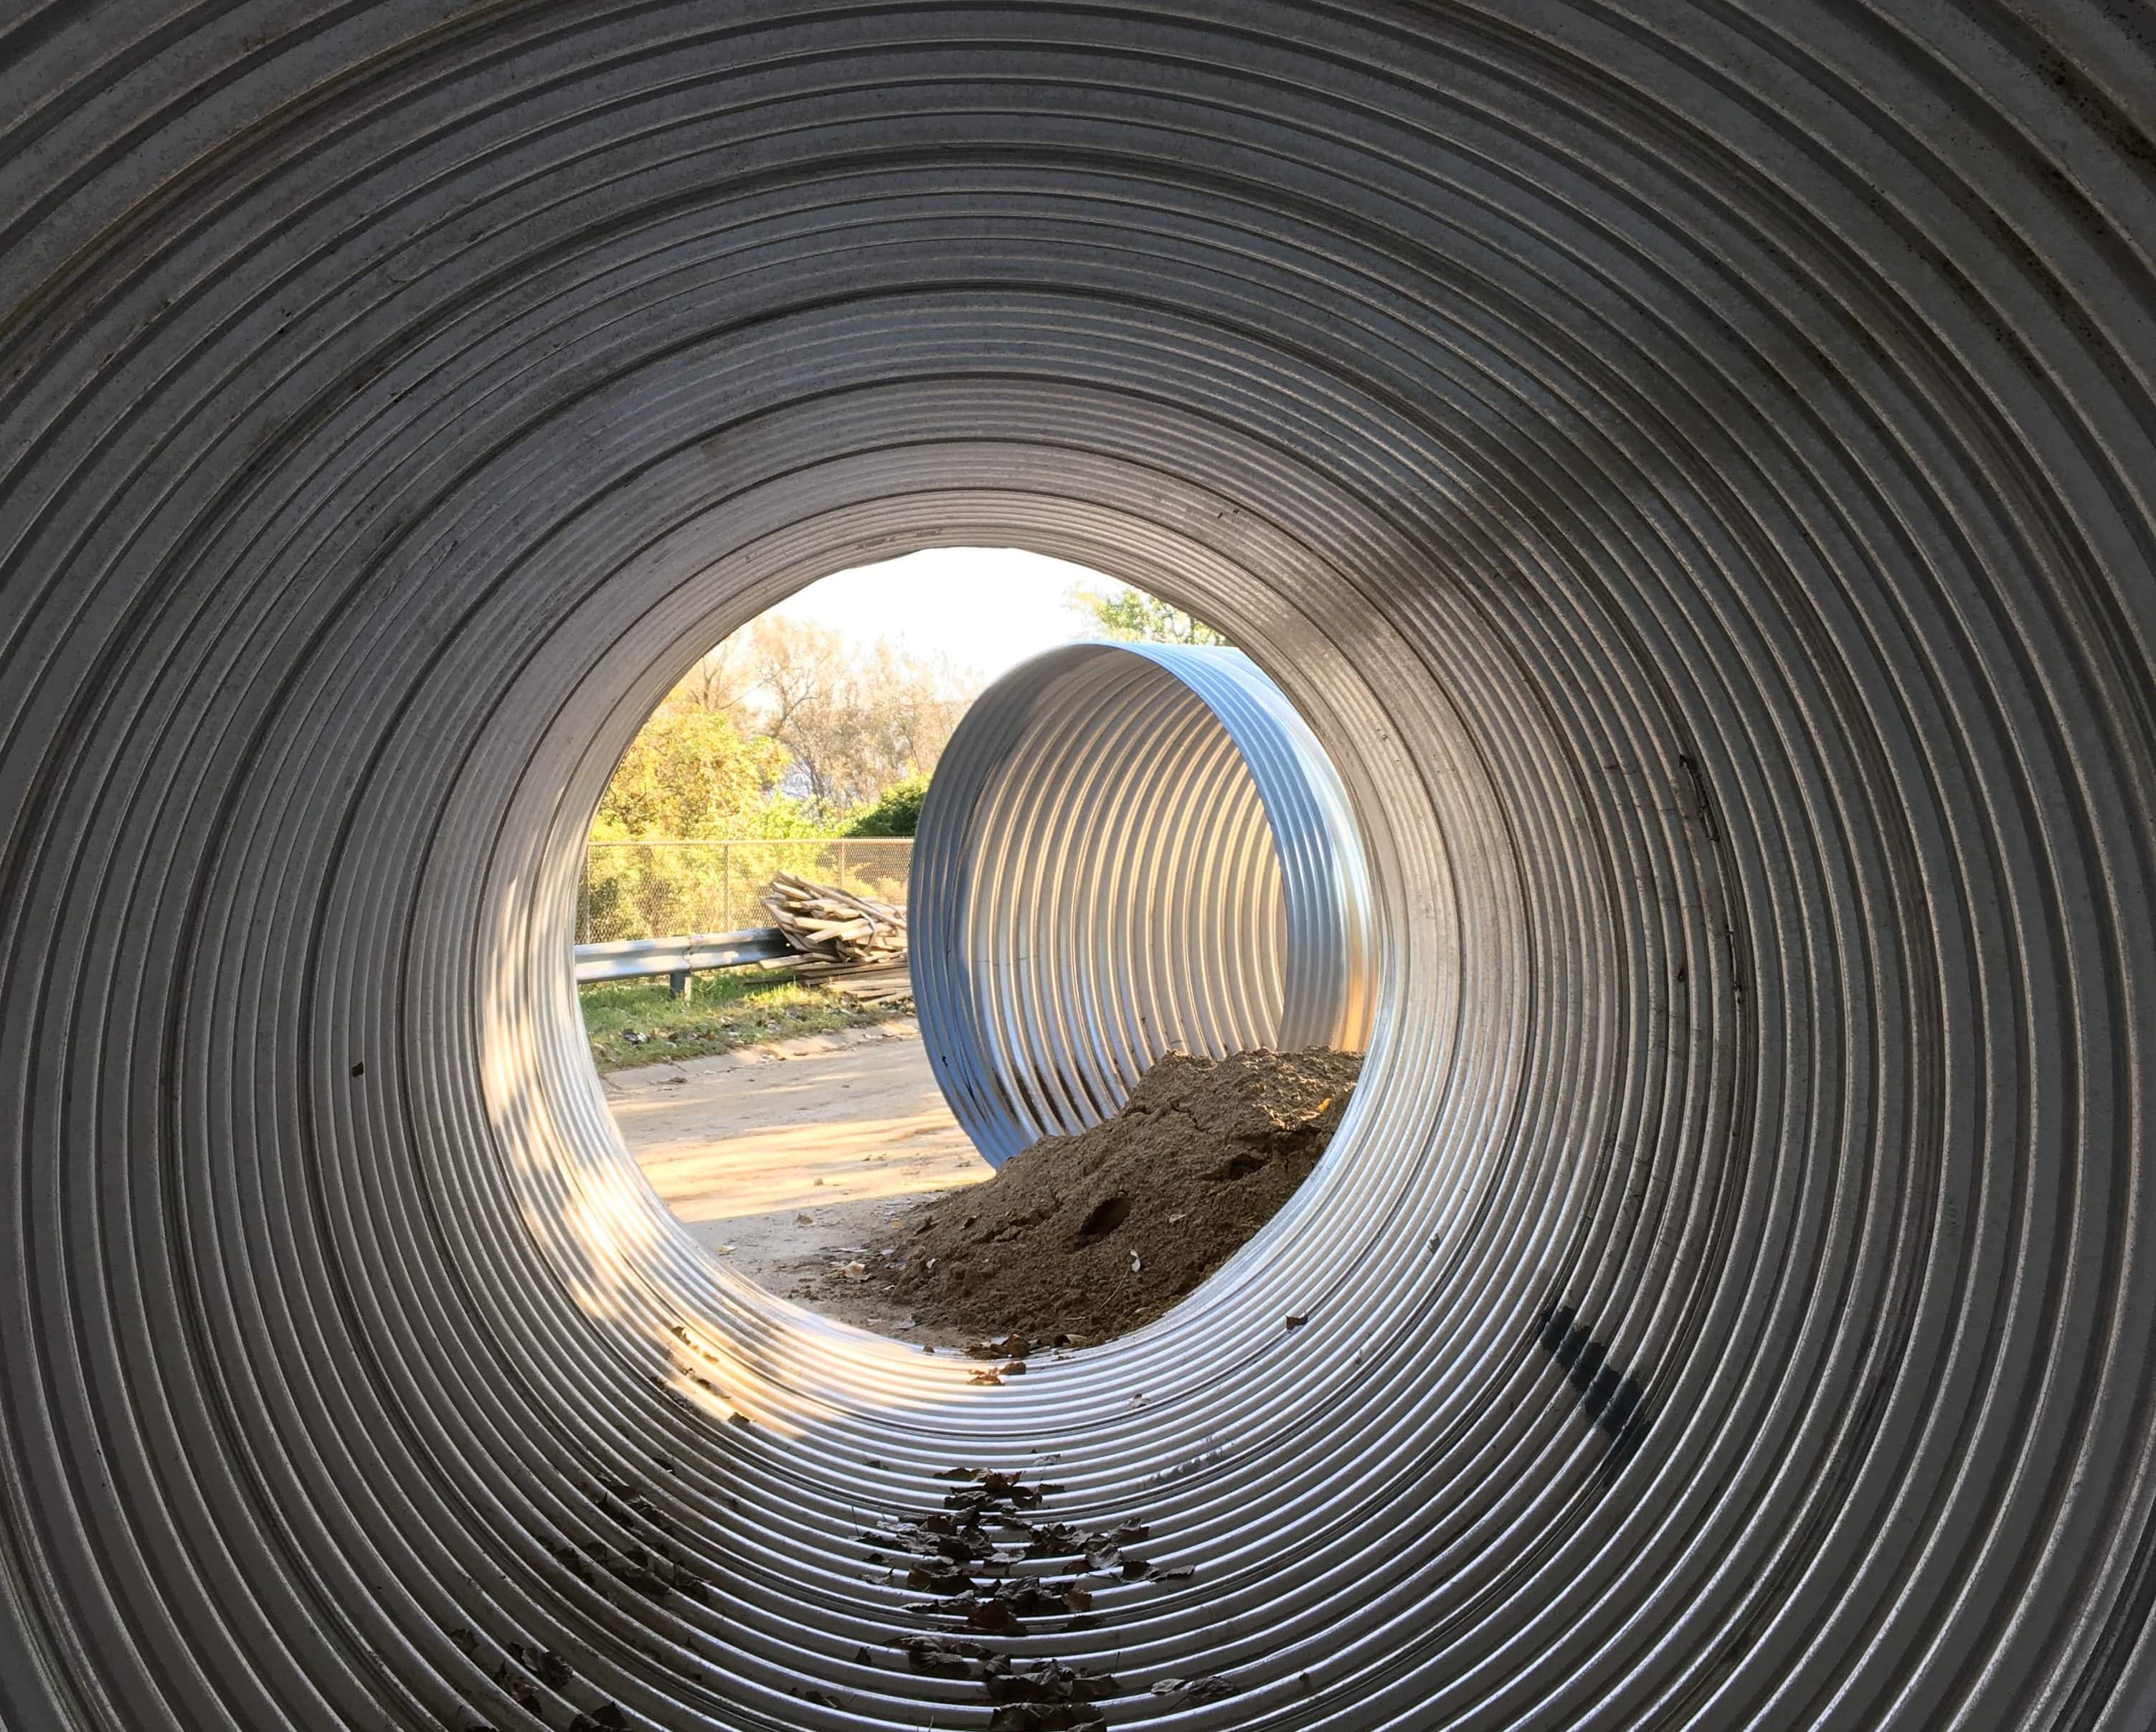 Relief Sewer Pipes